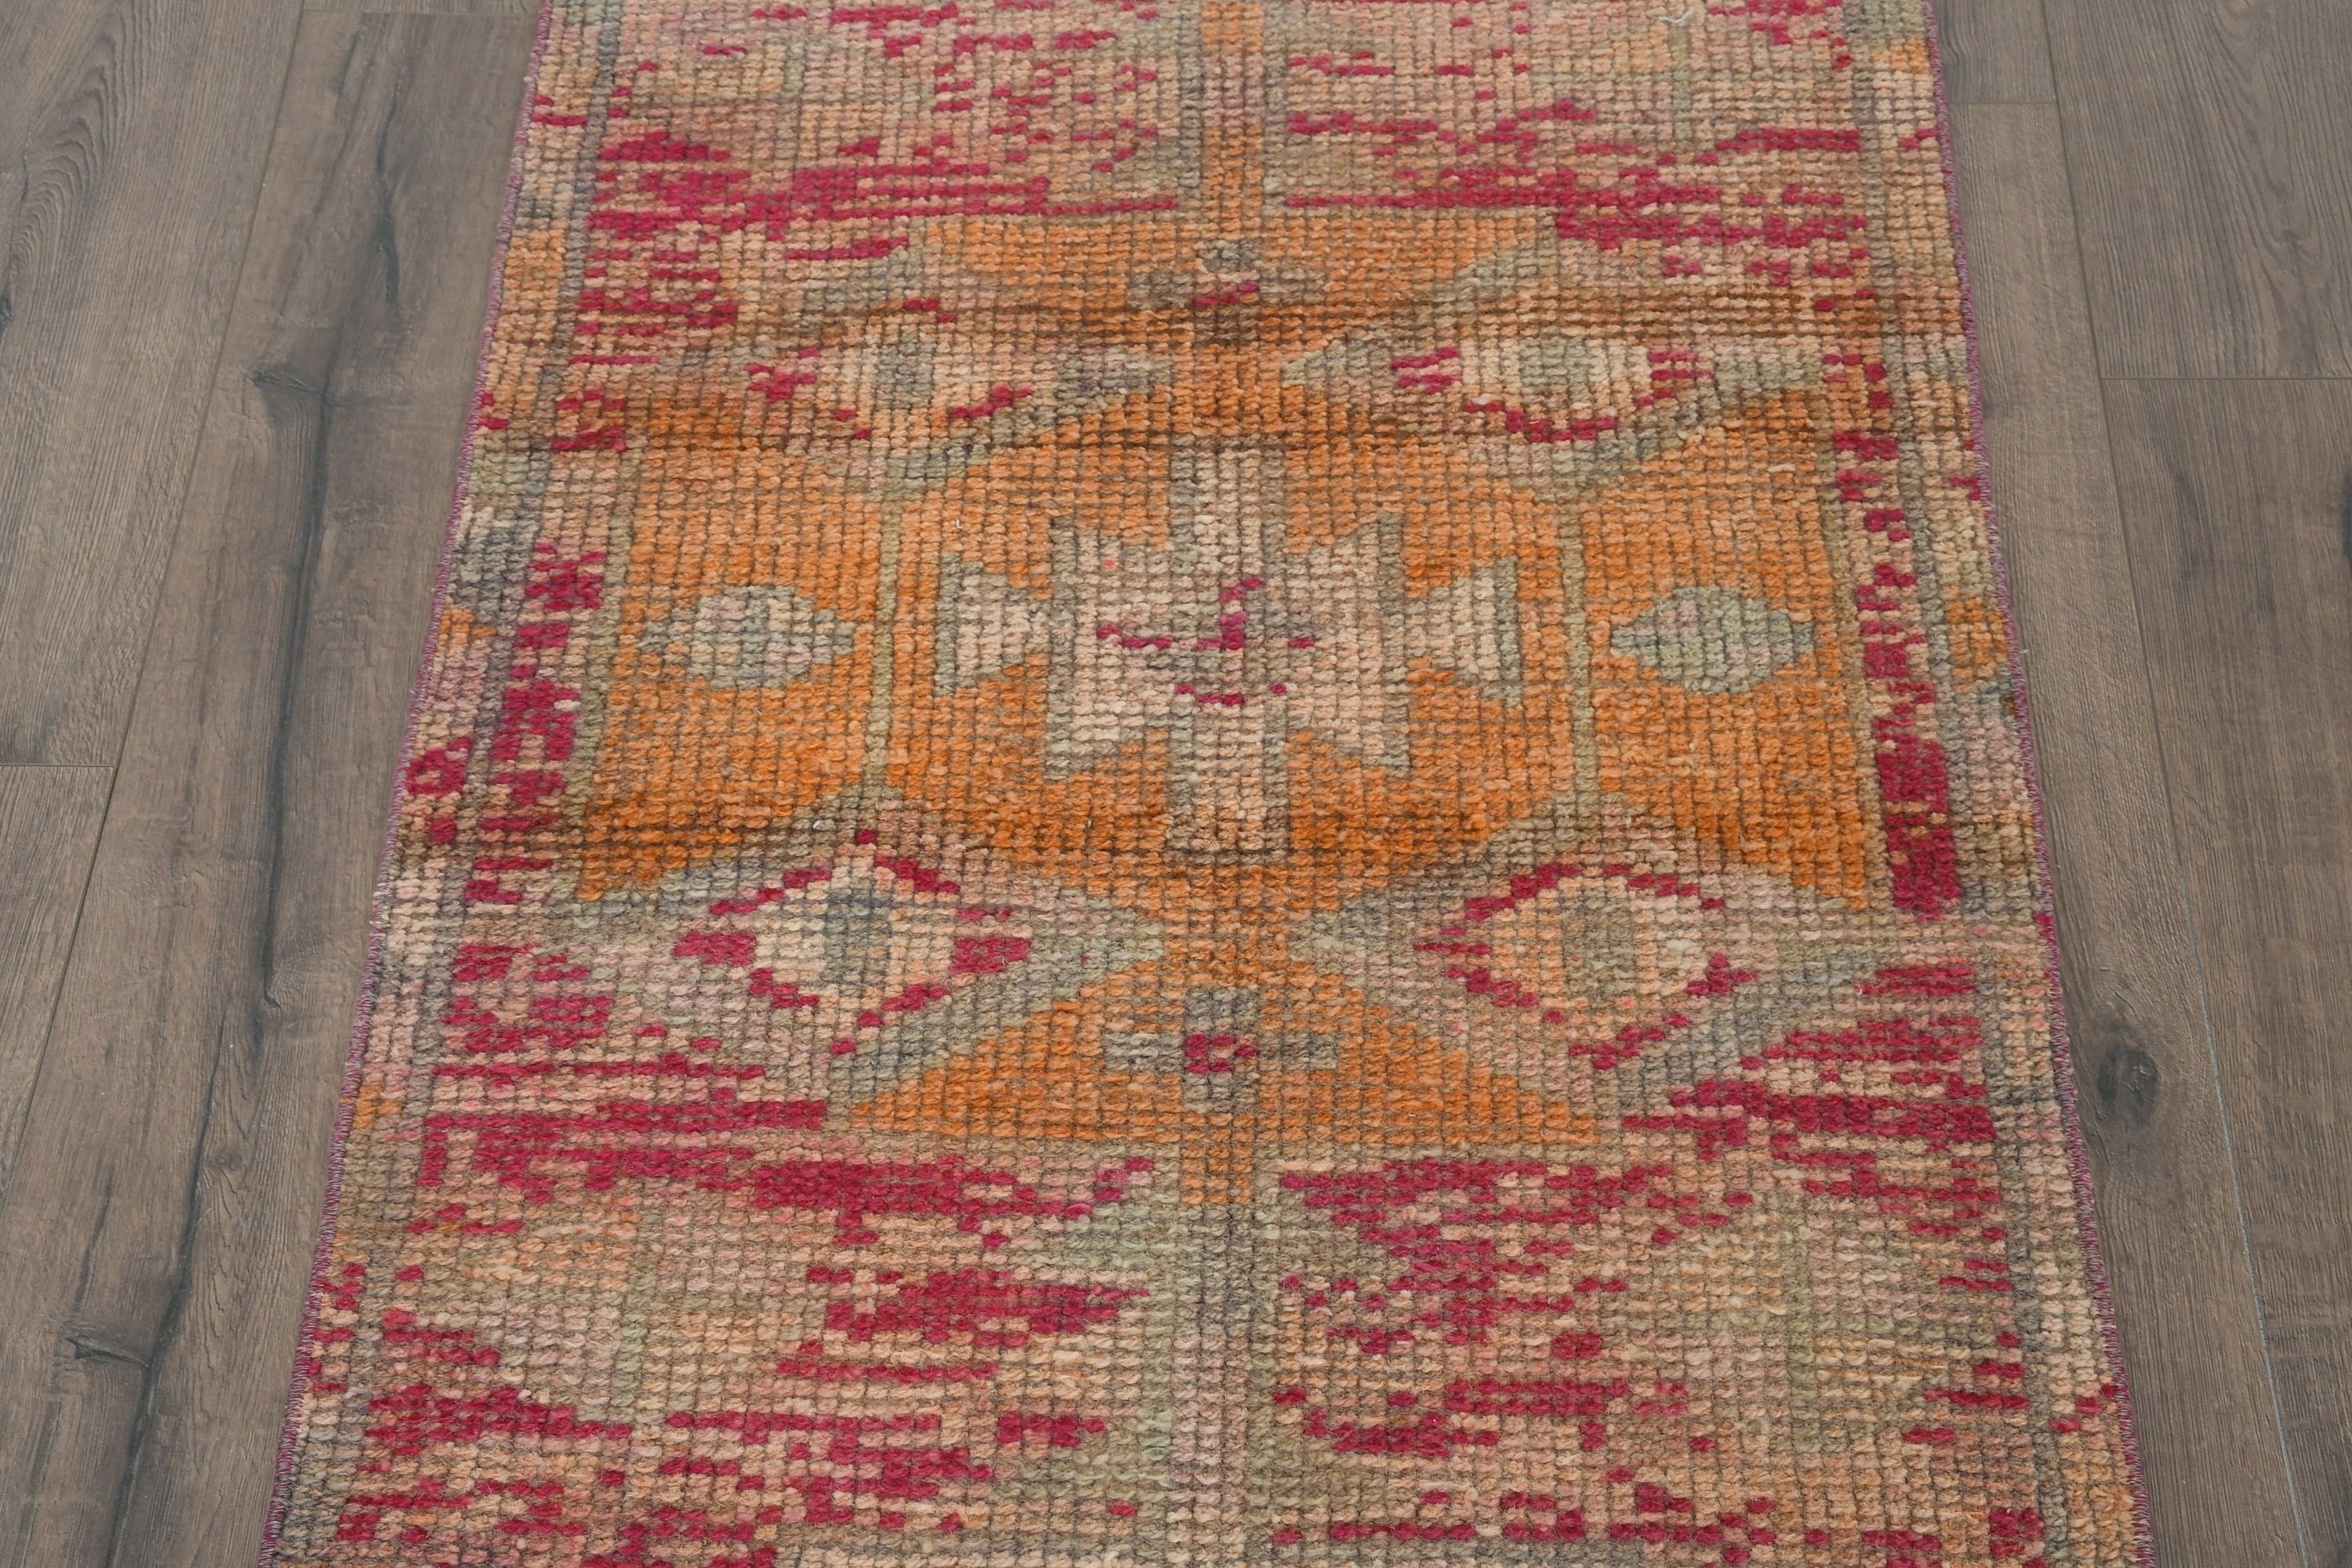 Antique Rugs, Turkish Rug, 2.5x11.6 ft Runner Rug, Vintage Rug, Stair Rug, Abstract Rug, Pink Moroccan Rug, Rugs for Runner, Anatolian Rug